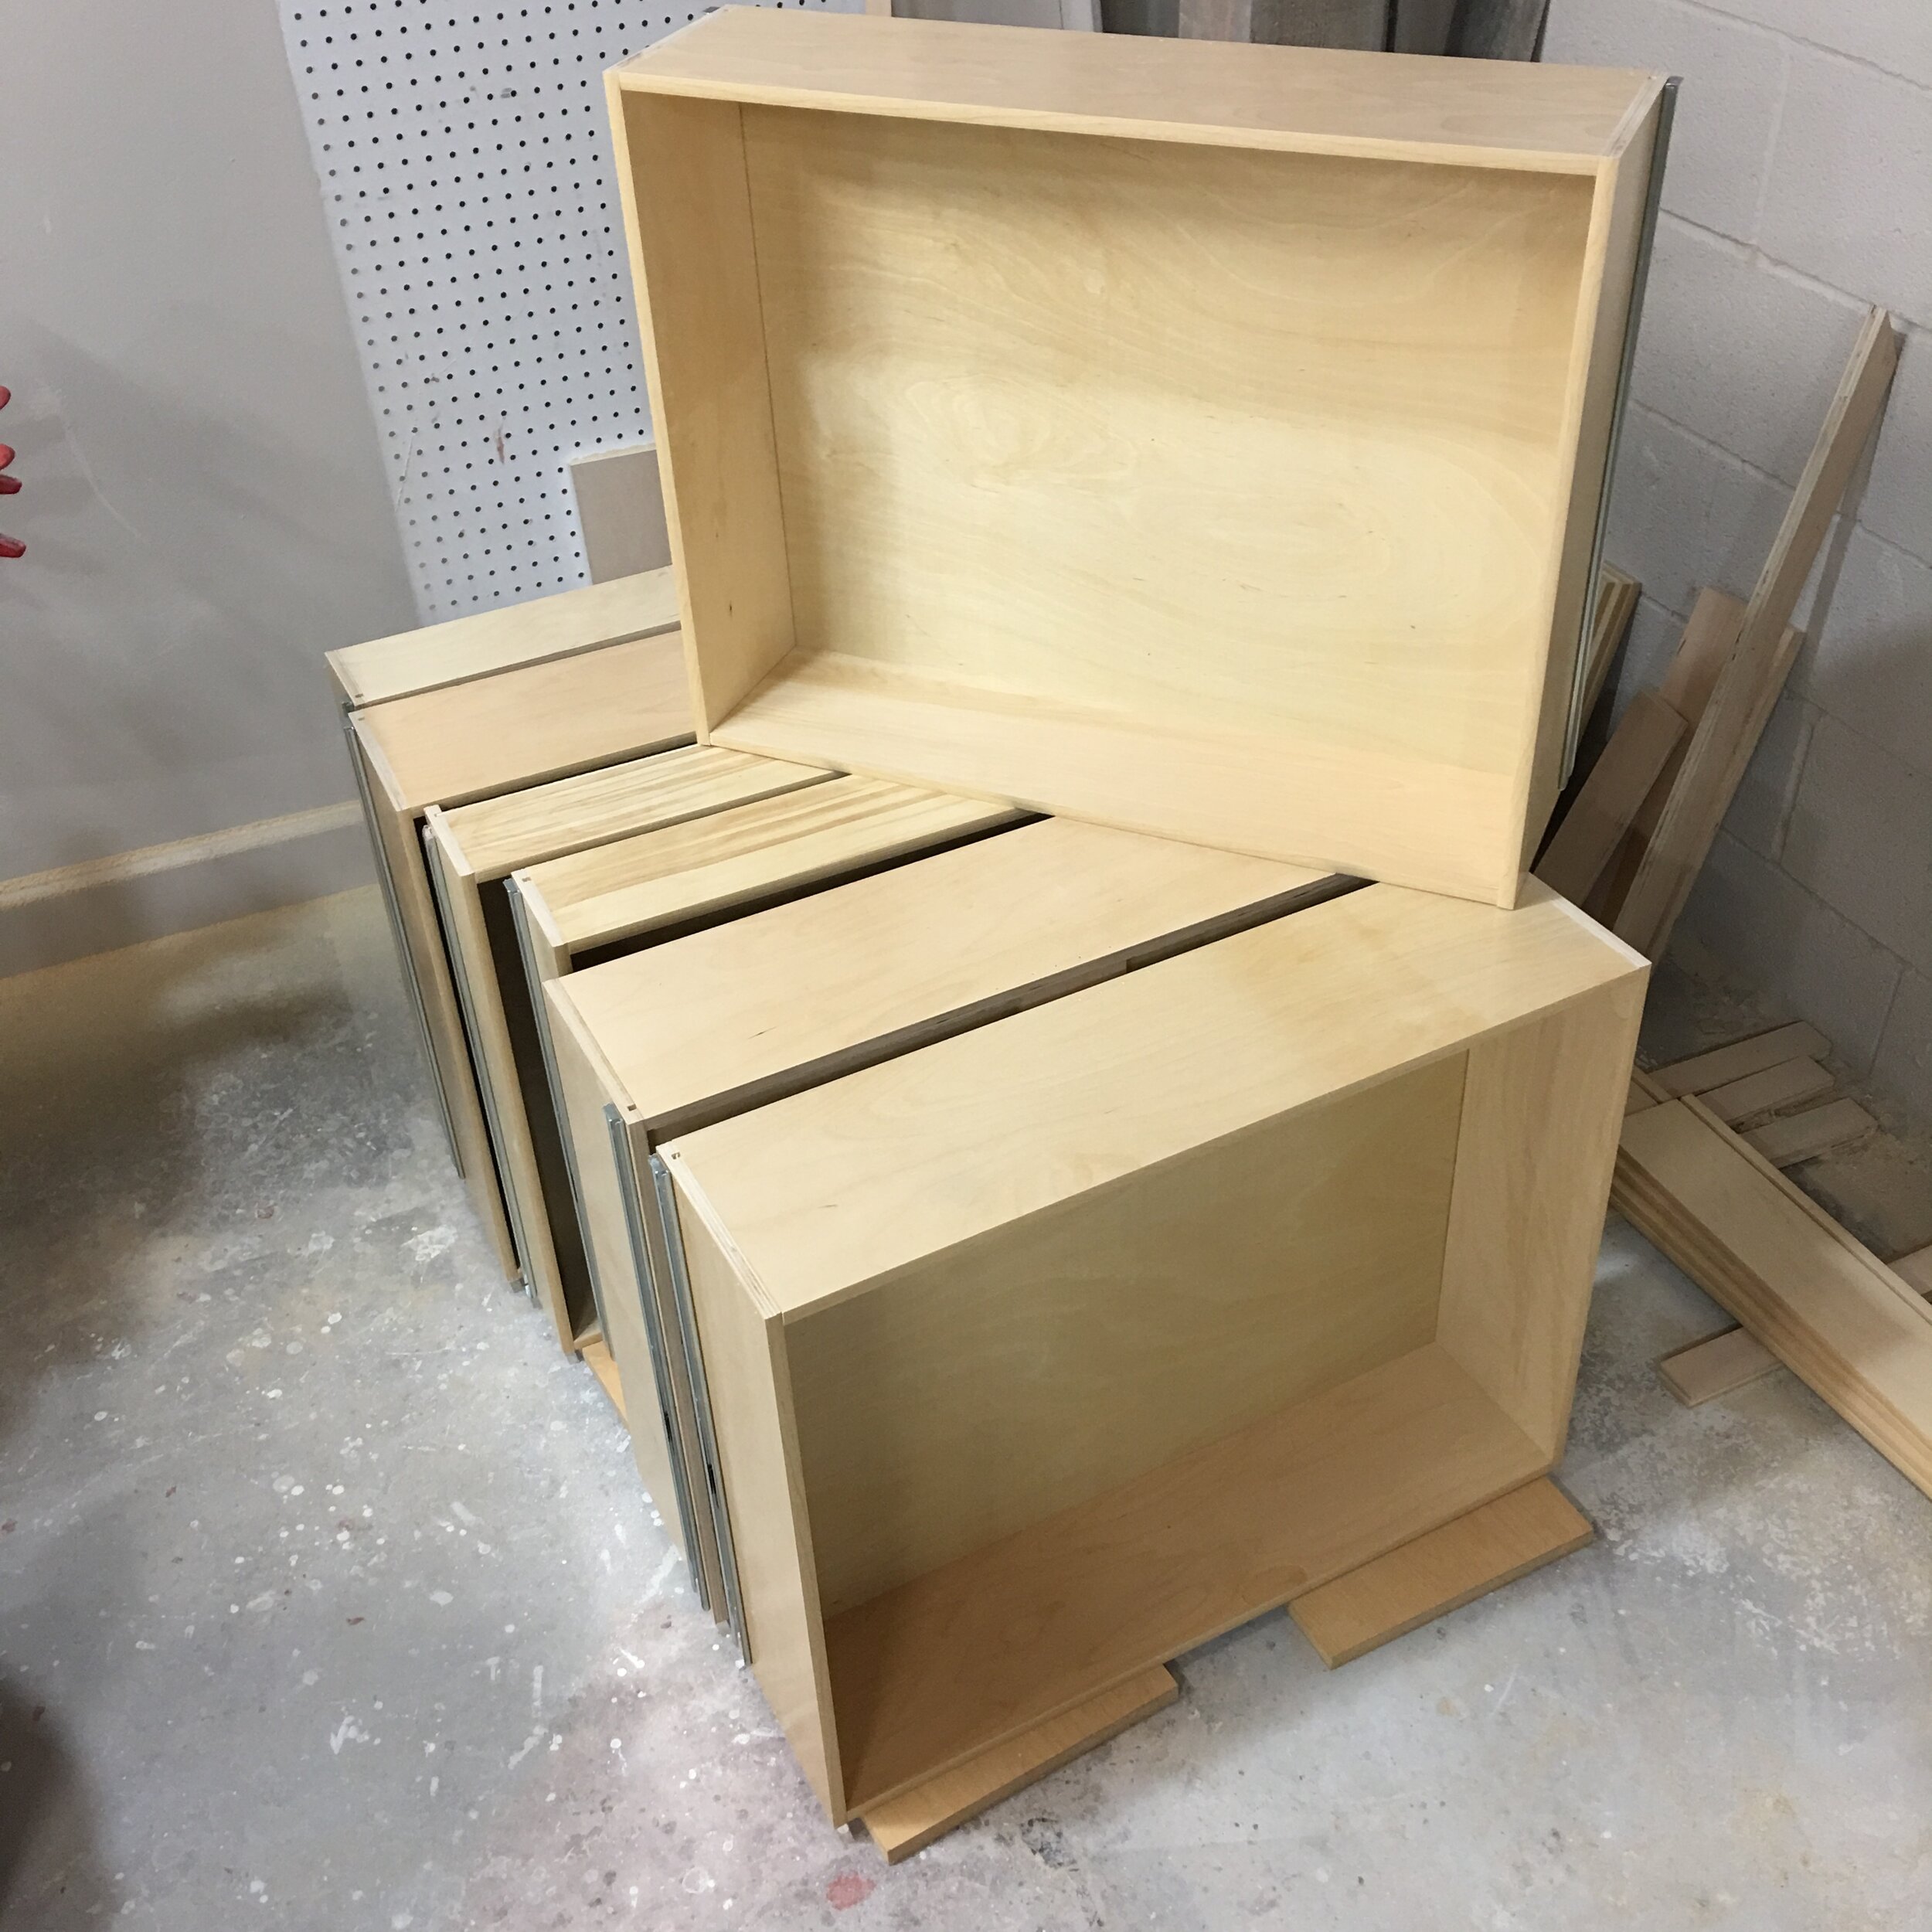 Natural Clear Finish Drawer Boxes.jpg